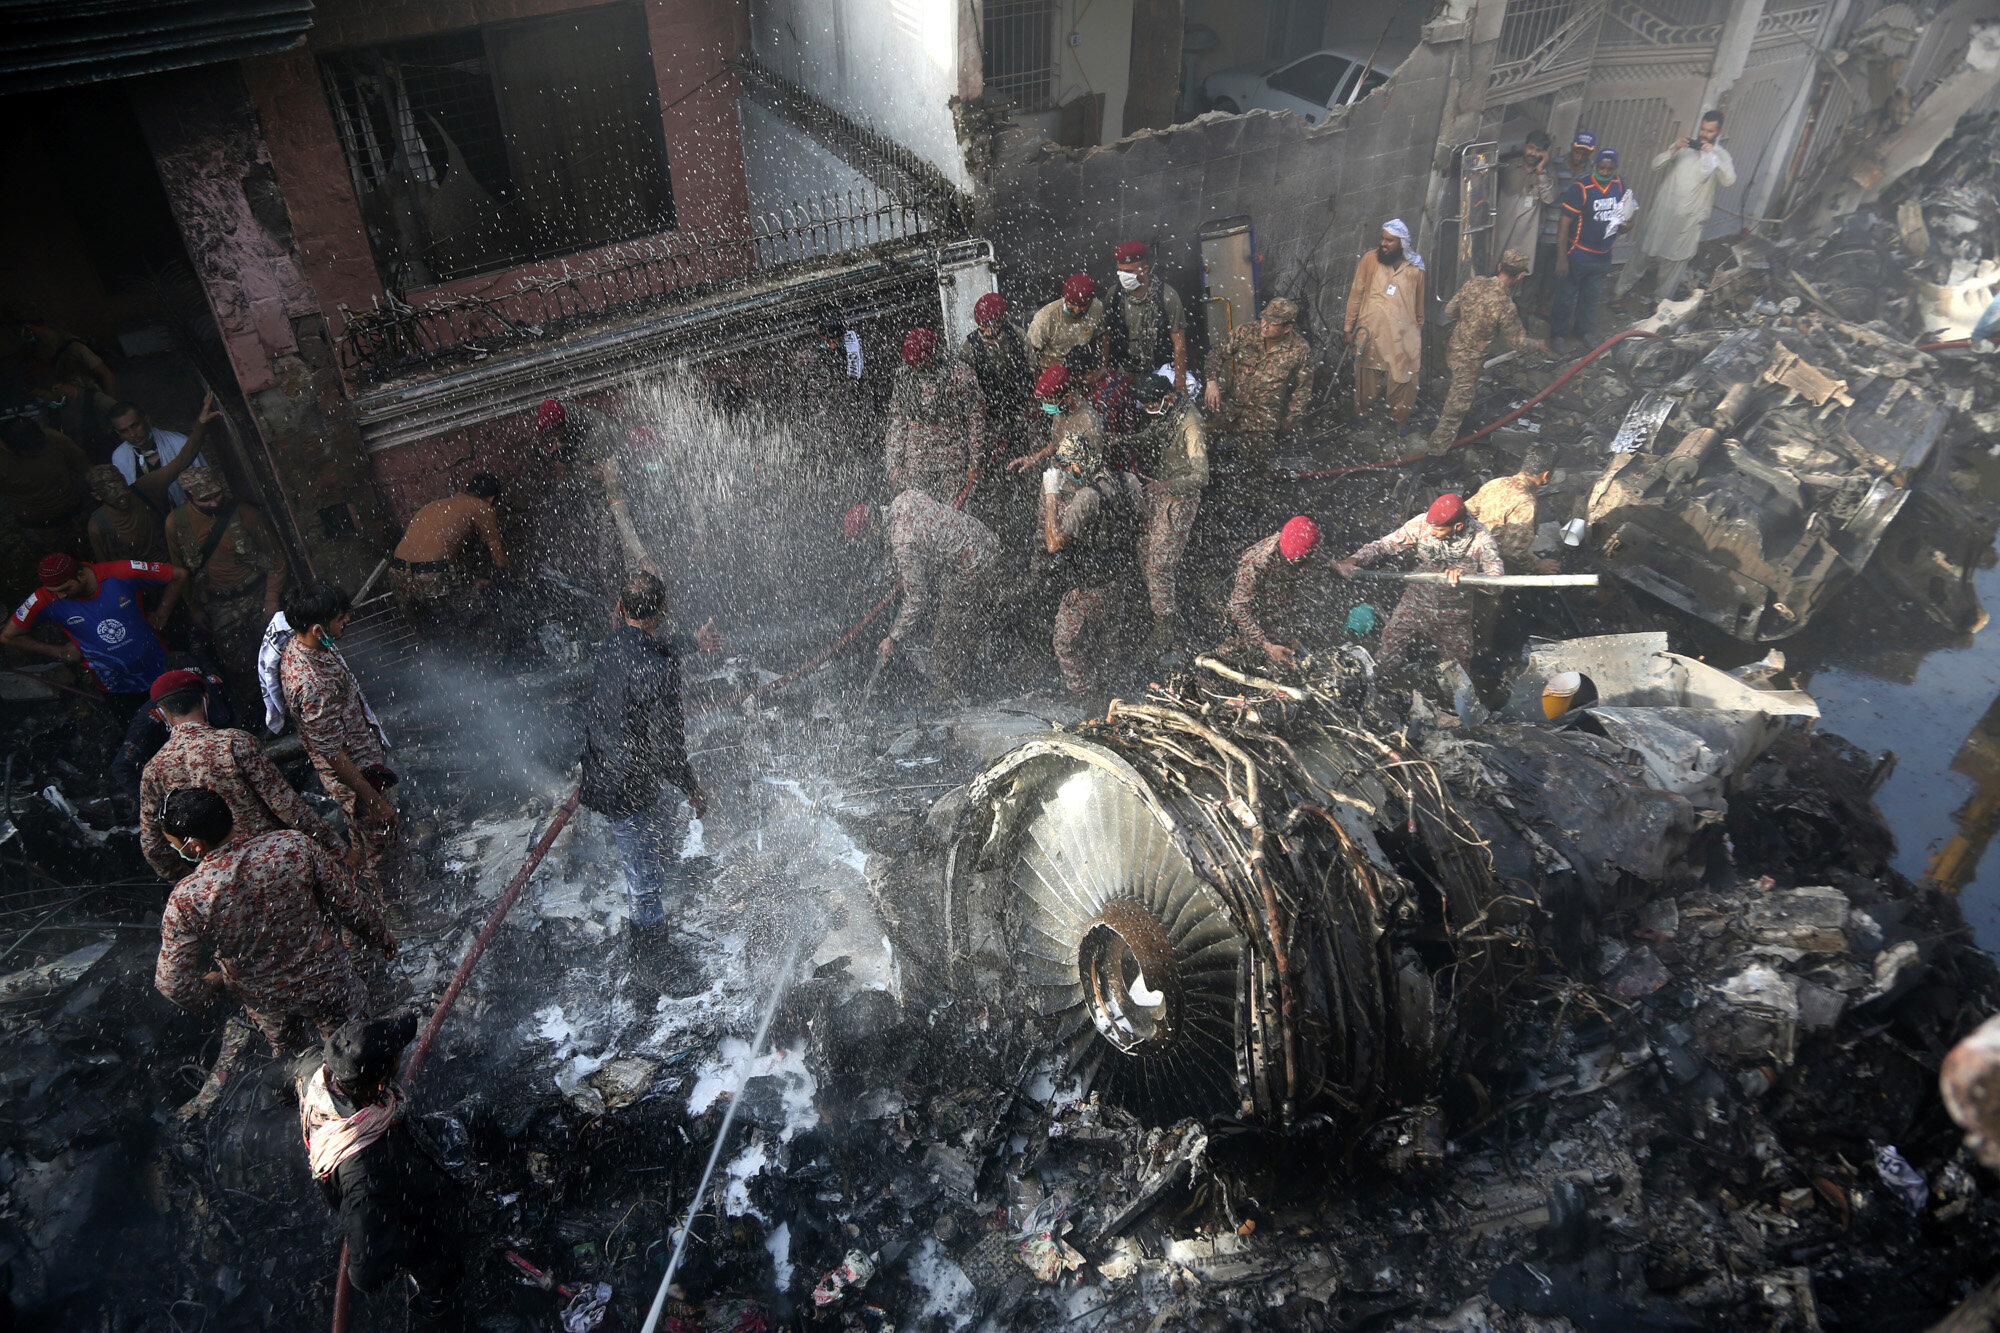  Rescue workers and local residents search for survivors in the wreckage of a plane that crashed with nearly 100 people onboard in a residential area of Karachi, Pakistan, on May 22, 2020. (AP Photo/Fareed Khan) 